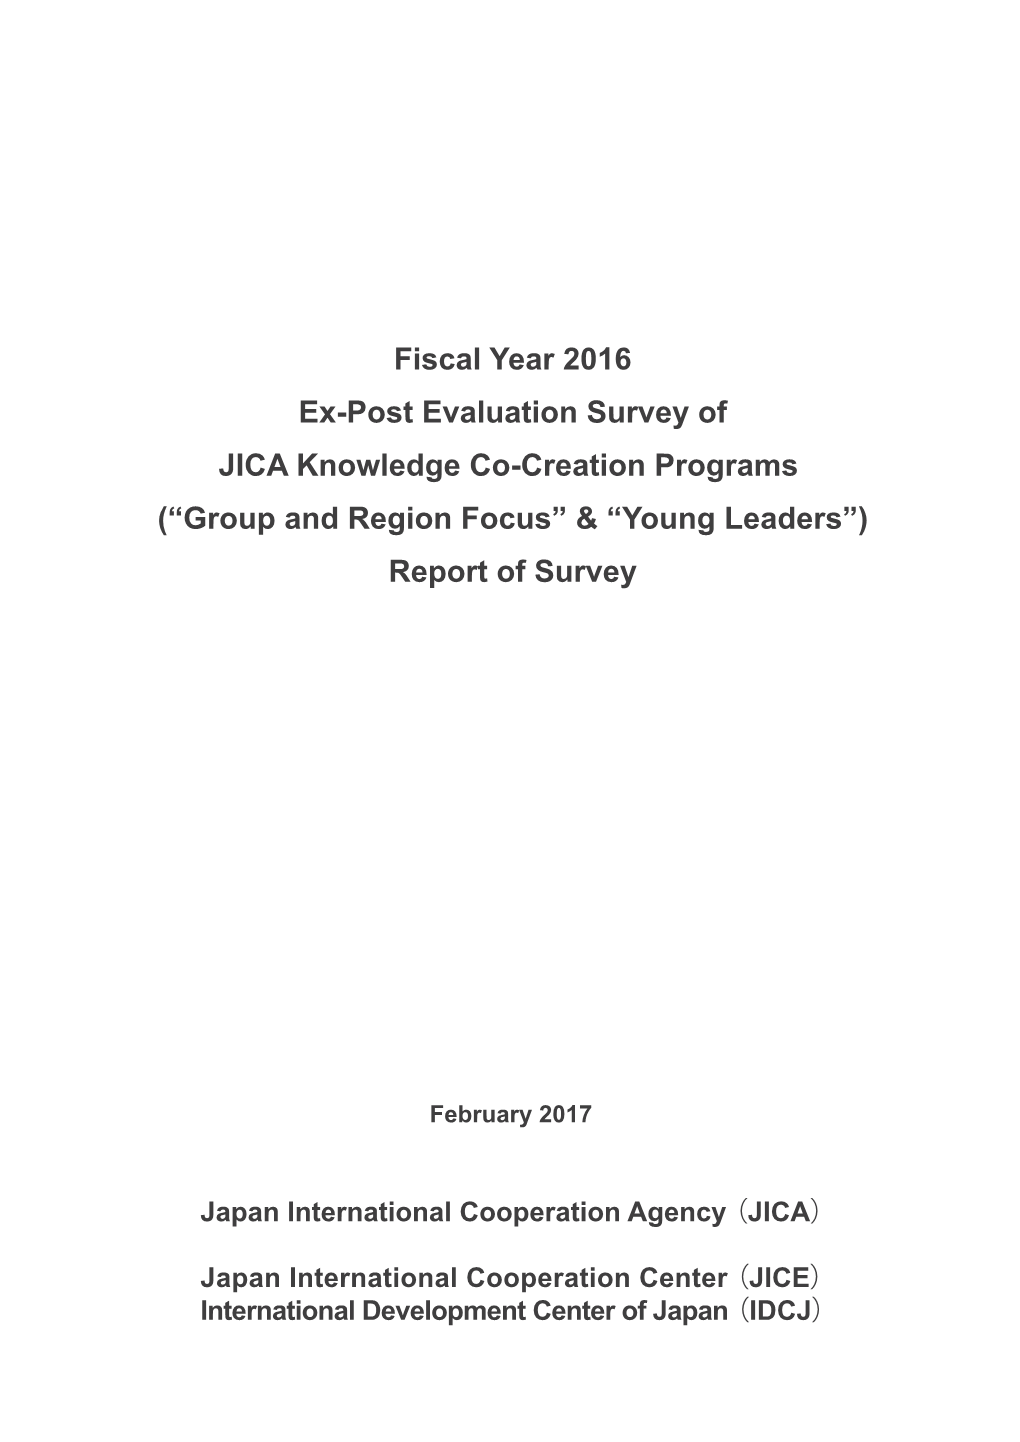 (“Group and Region Focus” & “Young Leaders”) Report of Survey